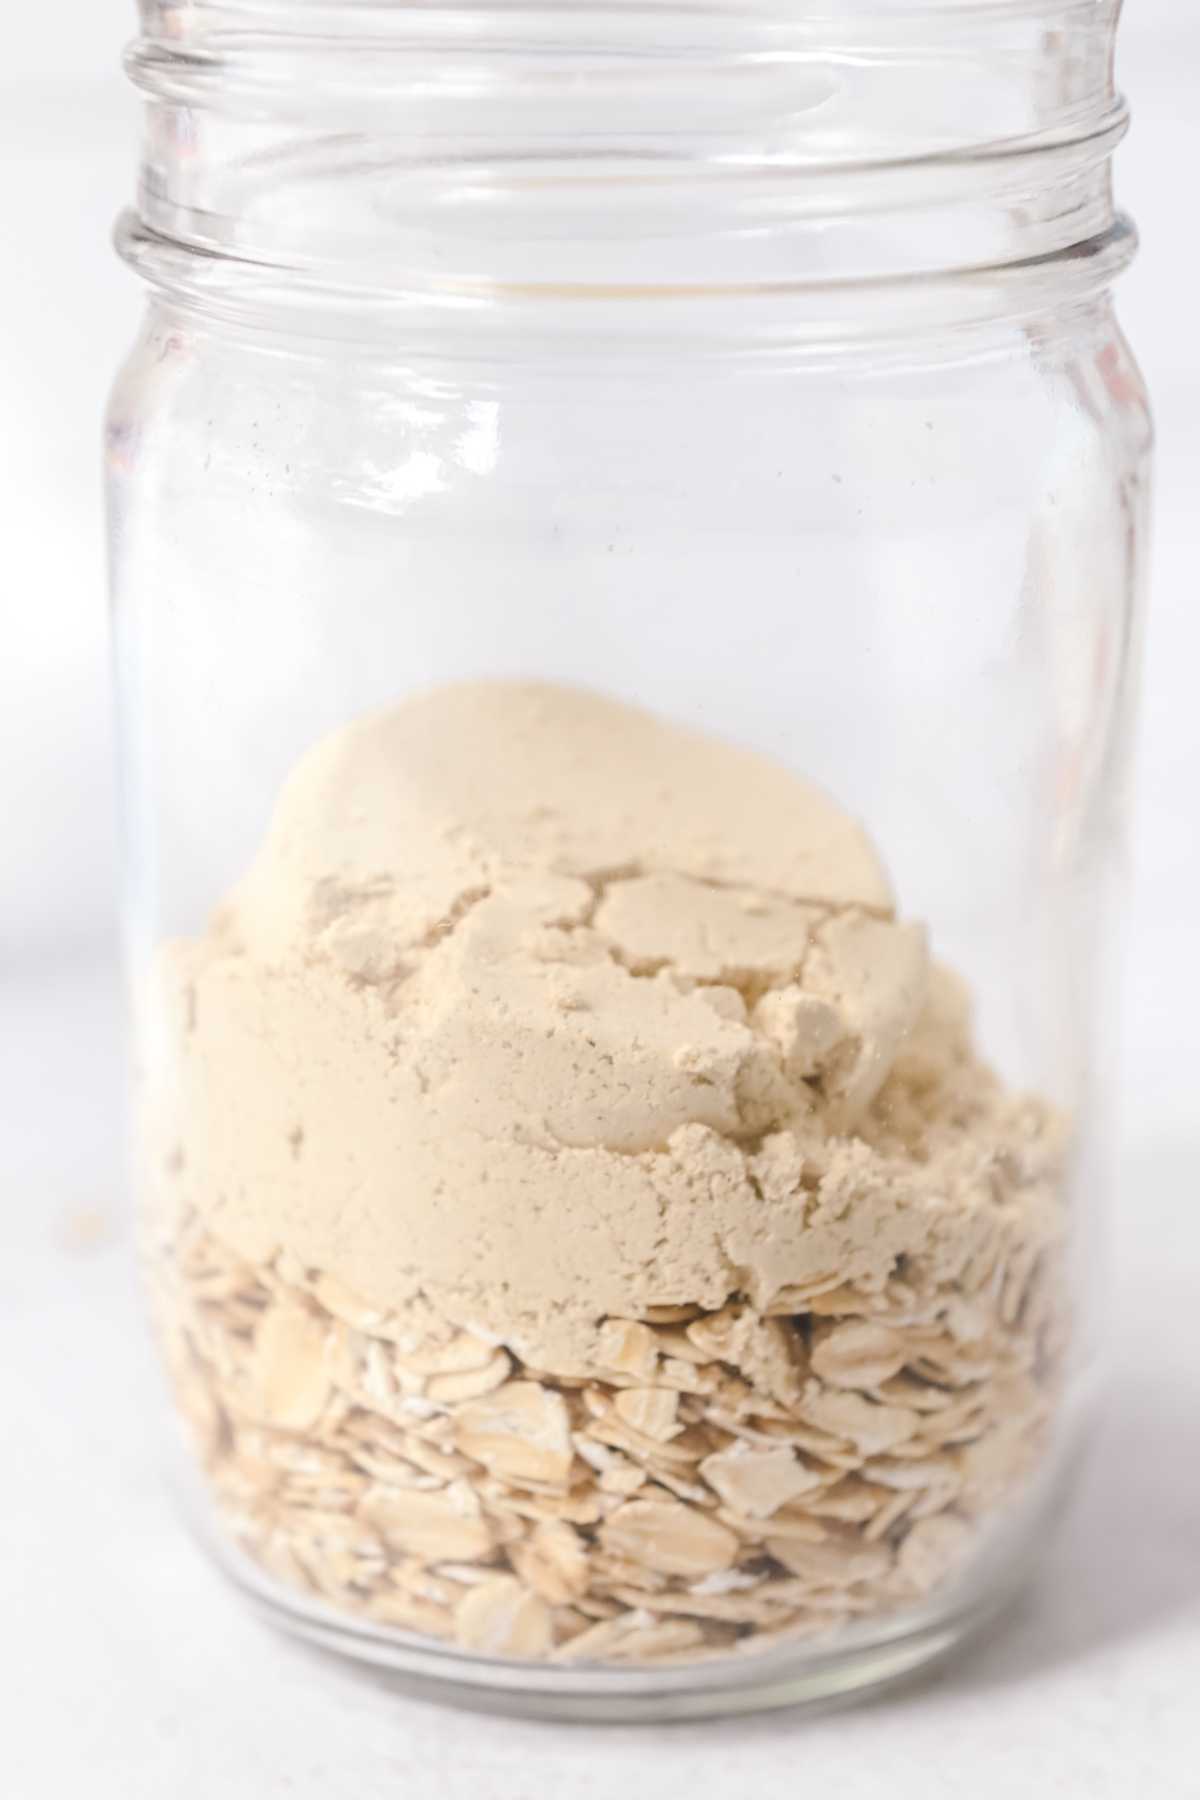 oats and protein powder in a glass jar.